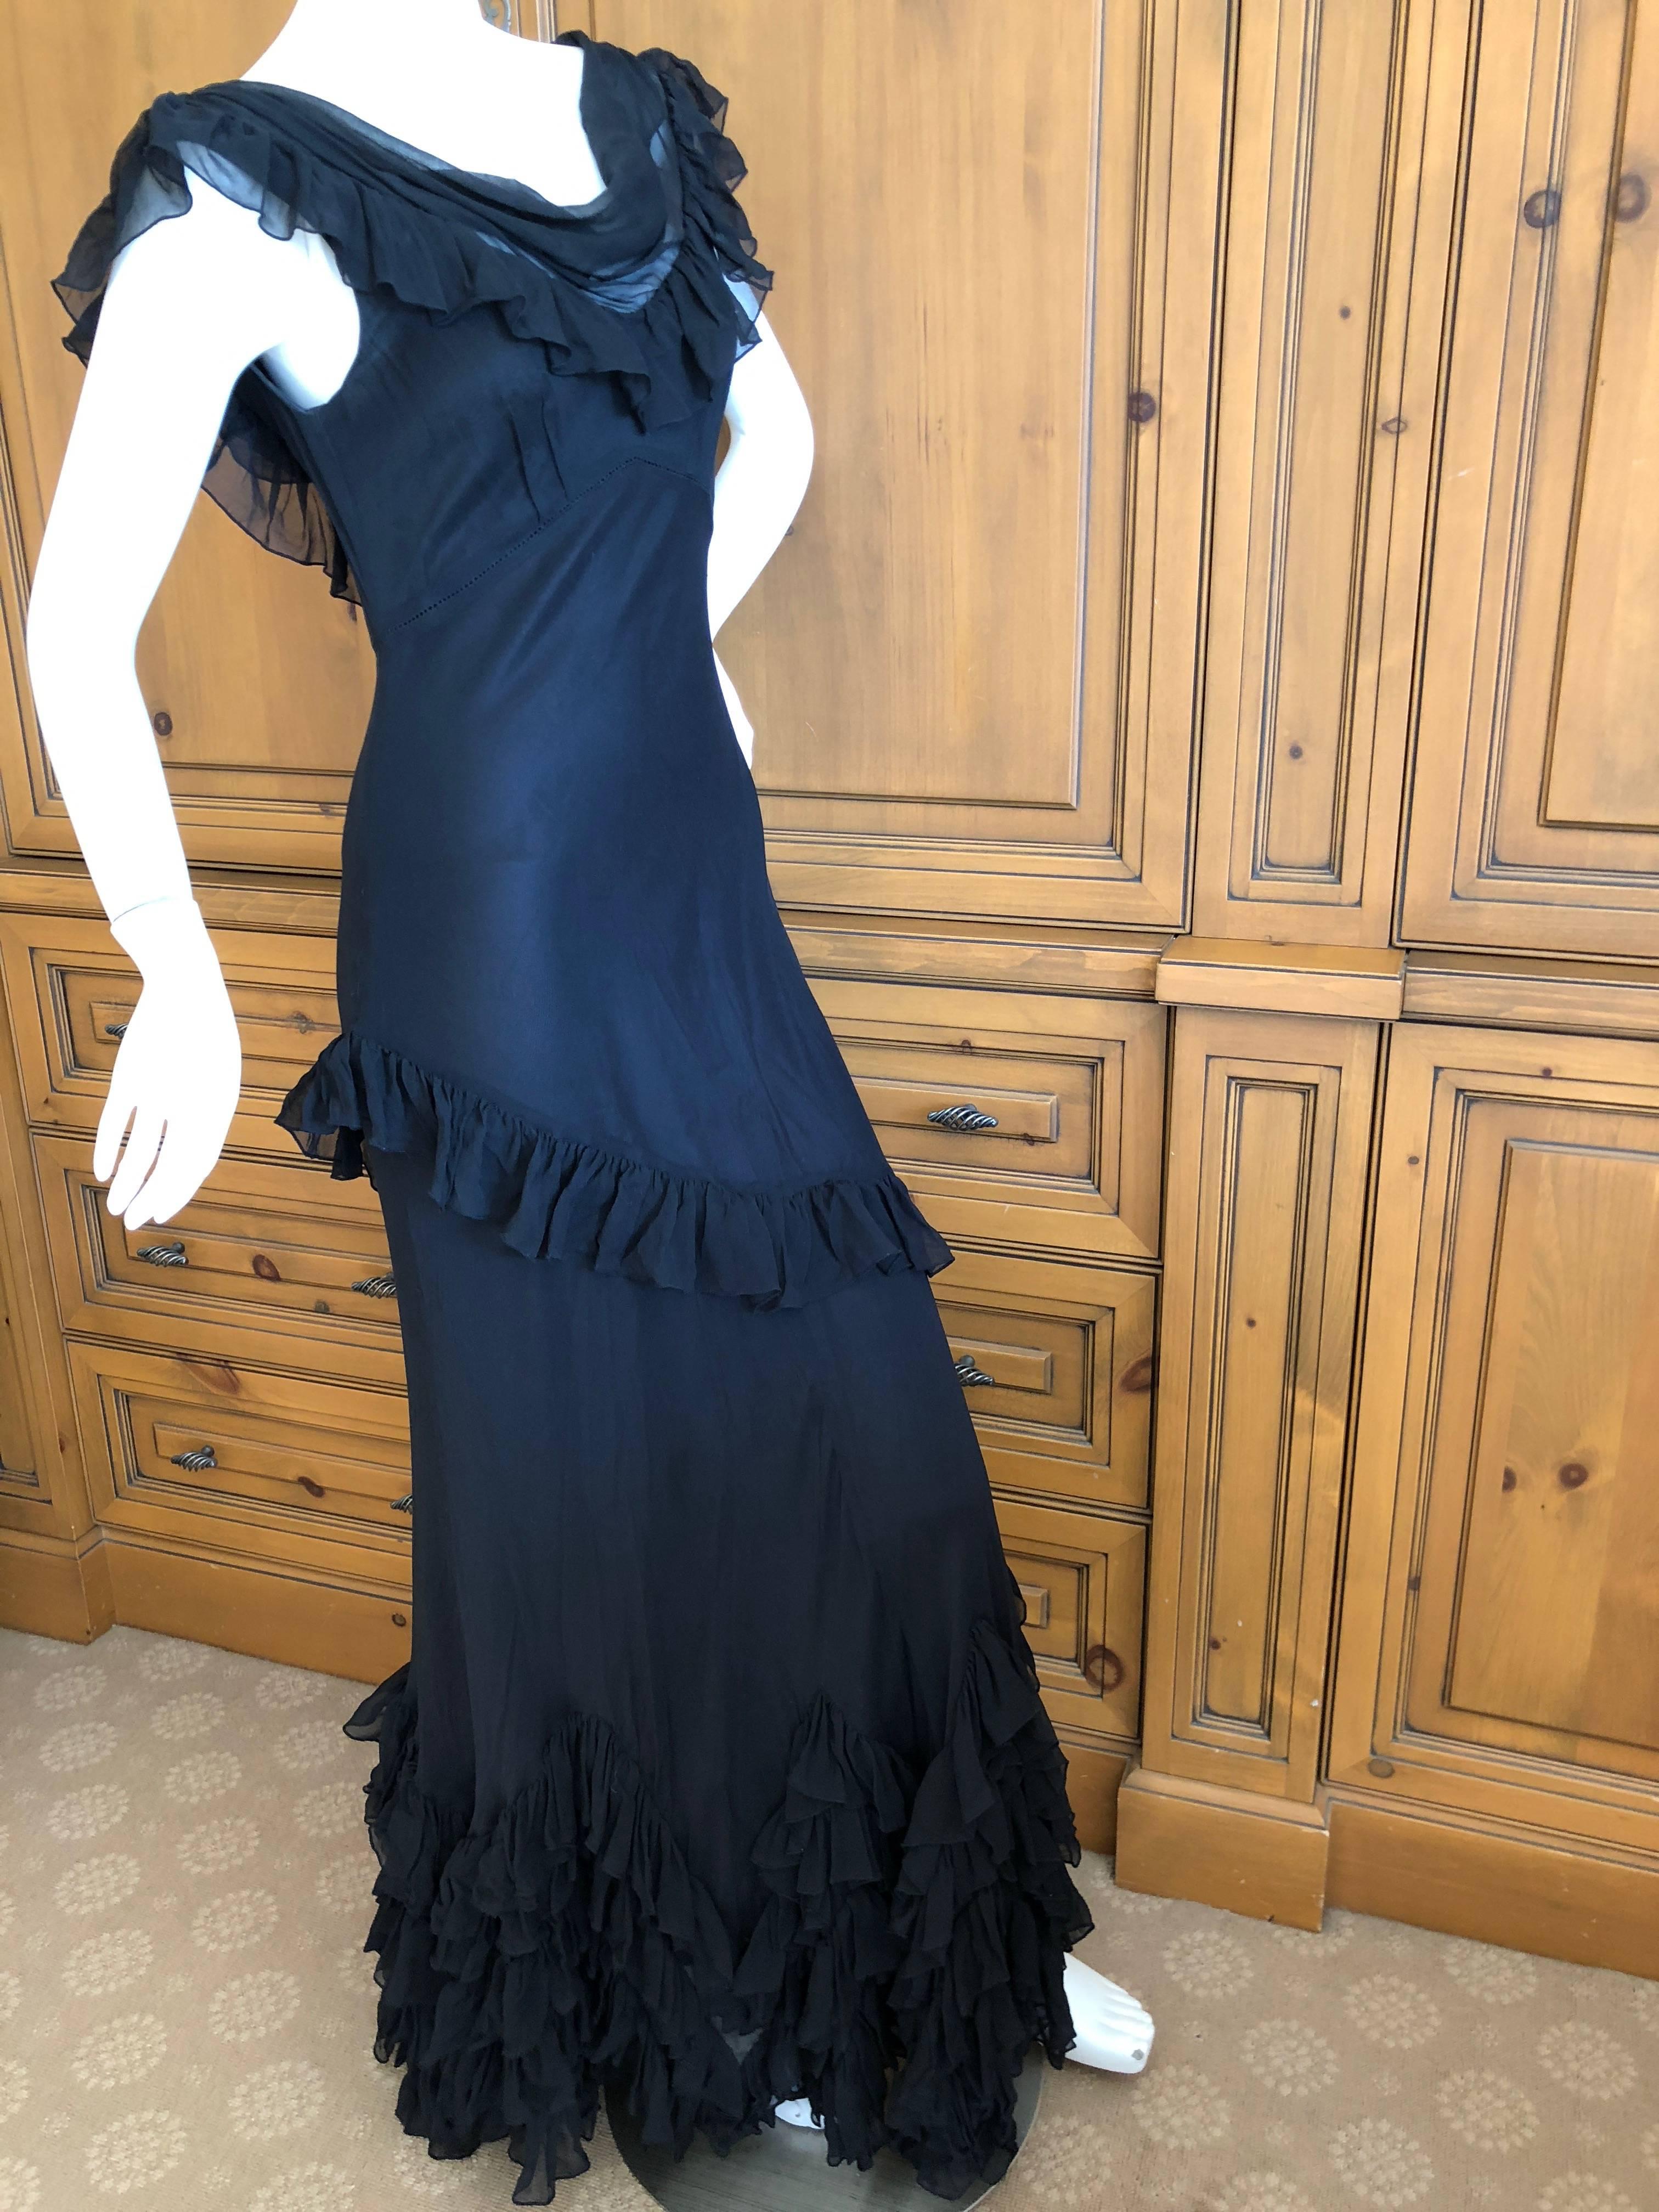 Women's  John Galliano Black Sheer Vintage Silk Ruffled Evening Dress with Cowl Back  For Sale